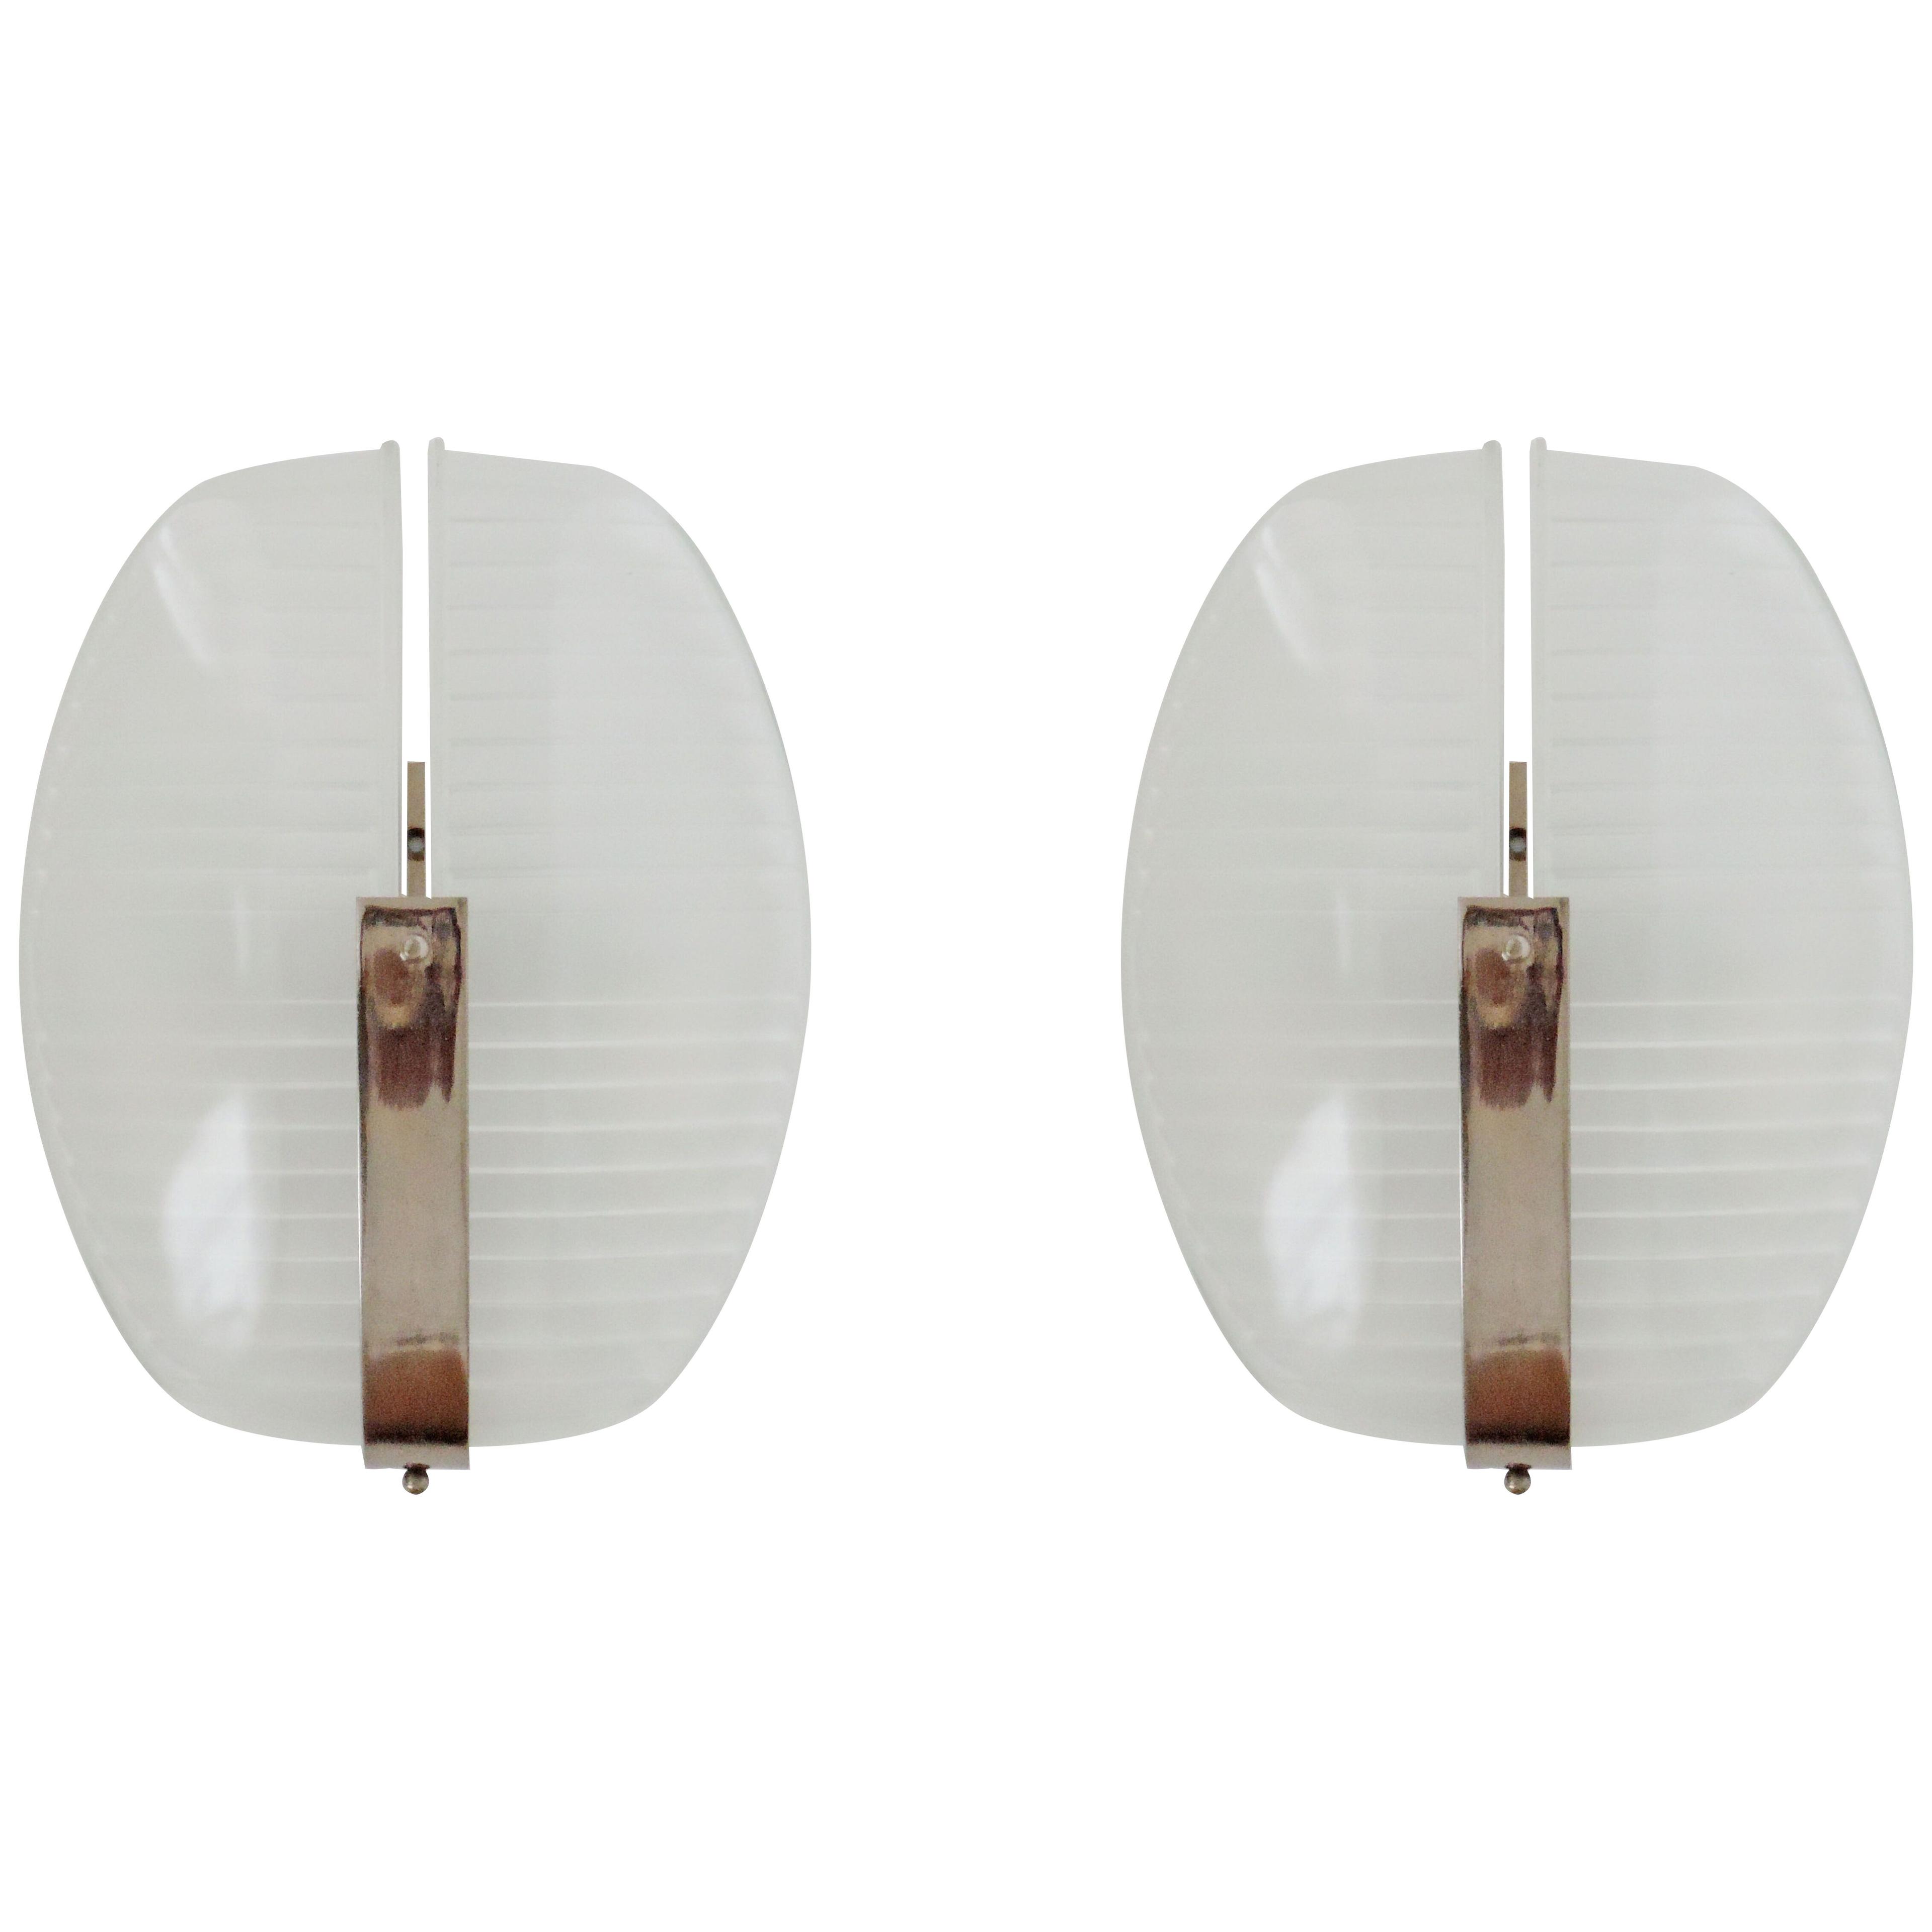 Vico Magistretti Pair of Lambda Wall Lights for Artemide, Italy, 1961